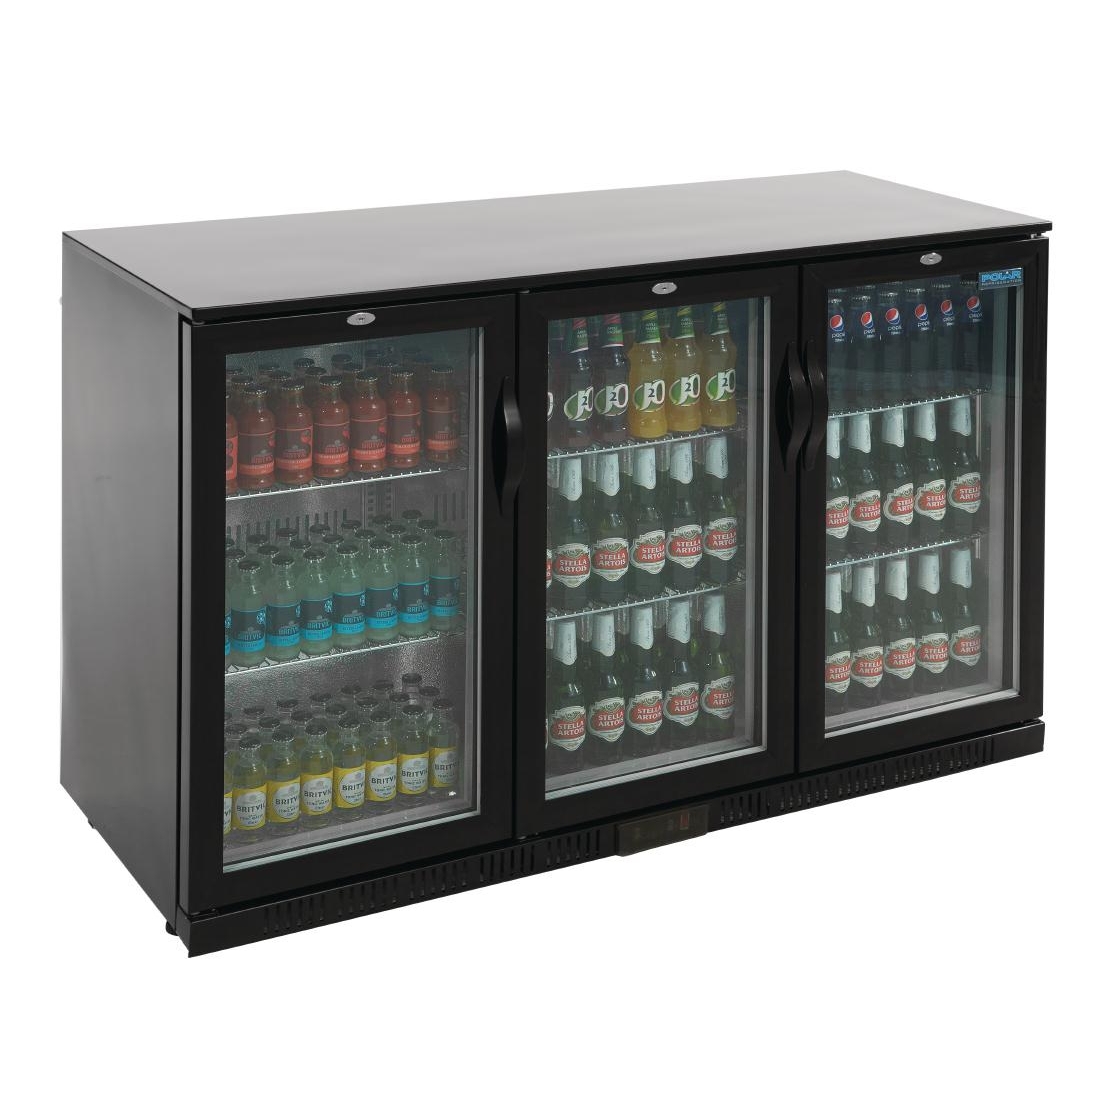 Polar Back Bar Cooler with Hinged Doors in Black 330Ltr